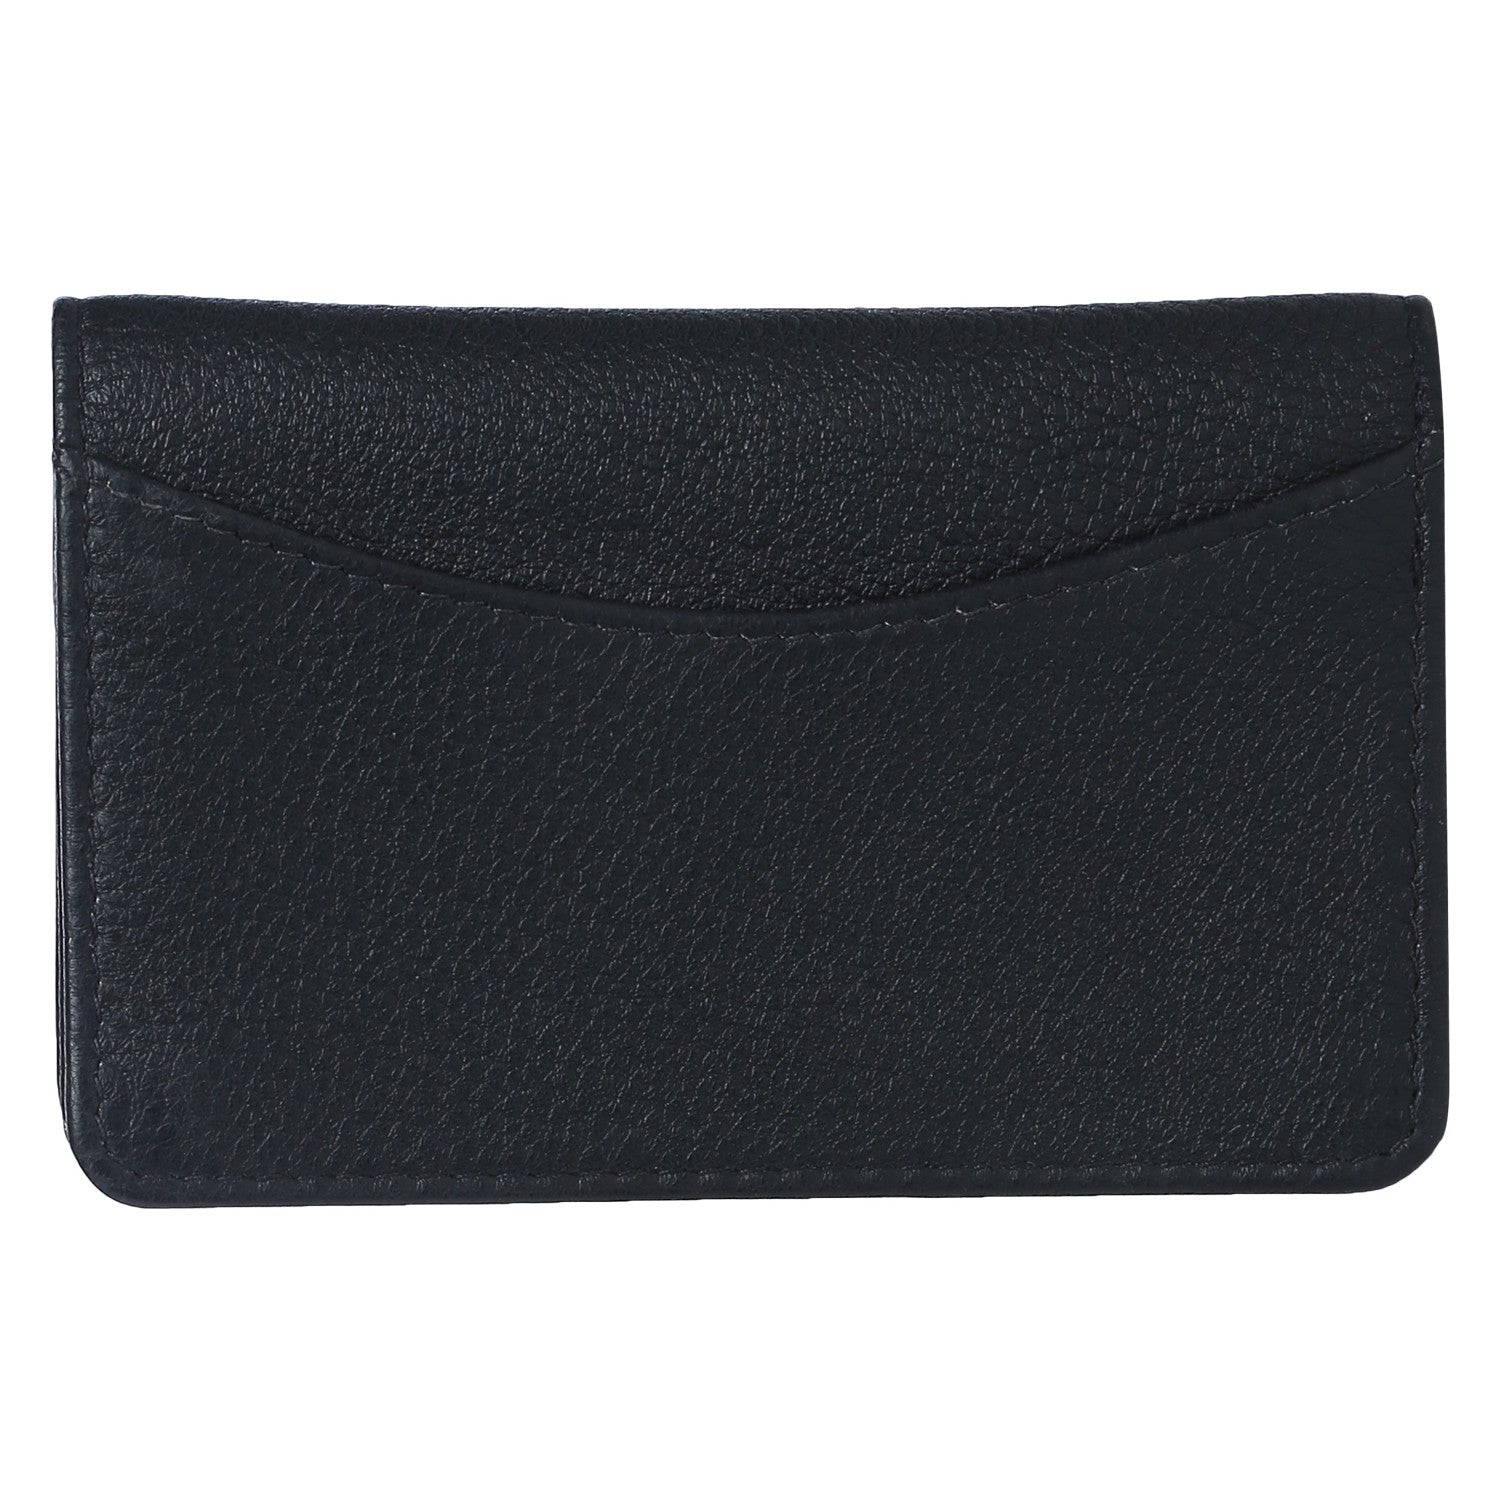 WOW India Mart. Visiting Card Holder (Leather) - Black